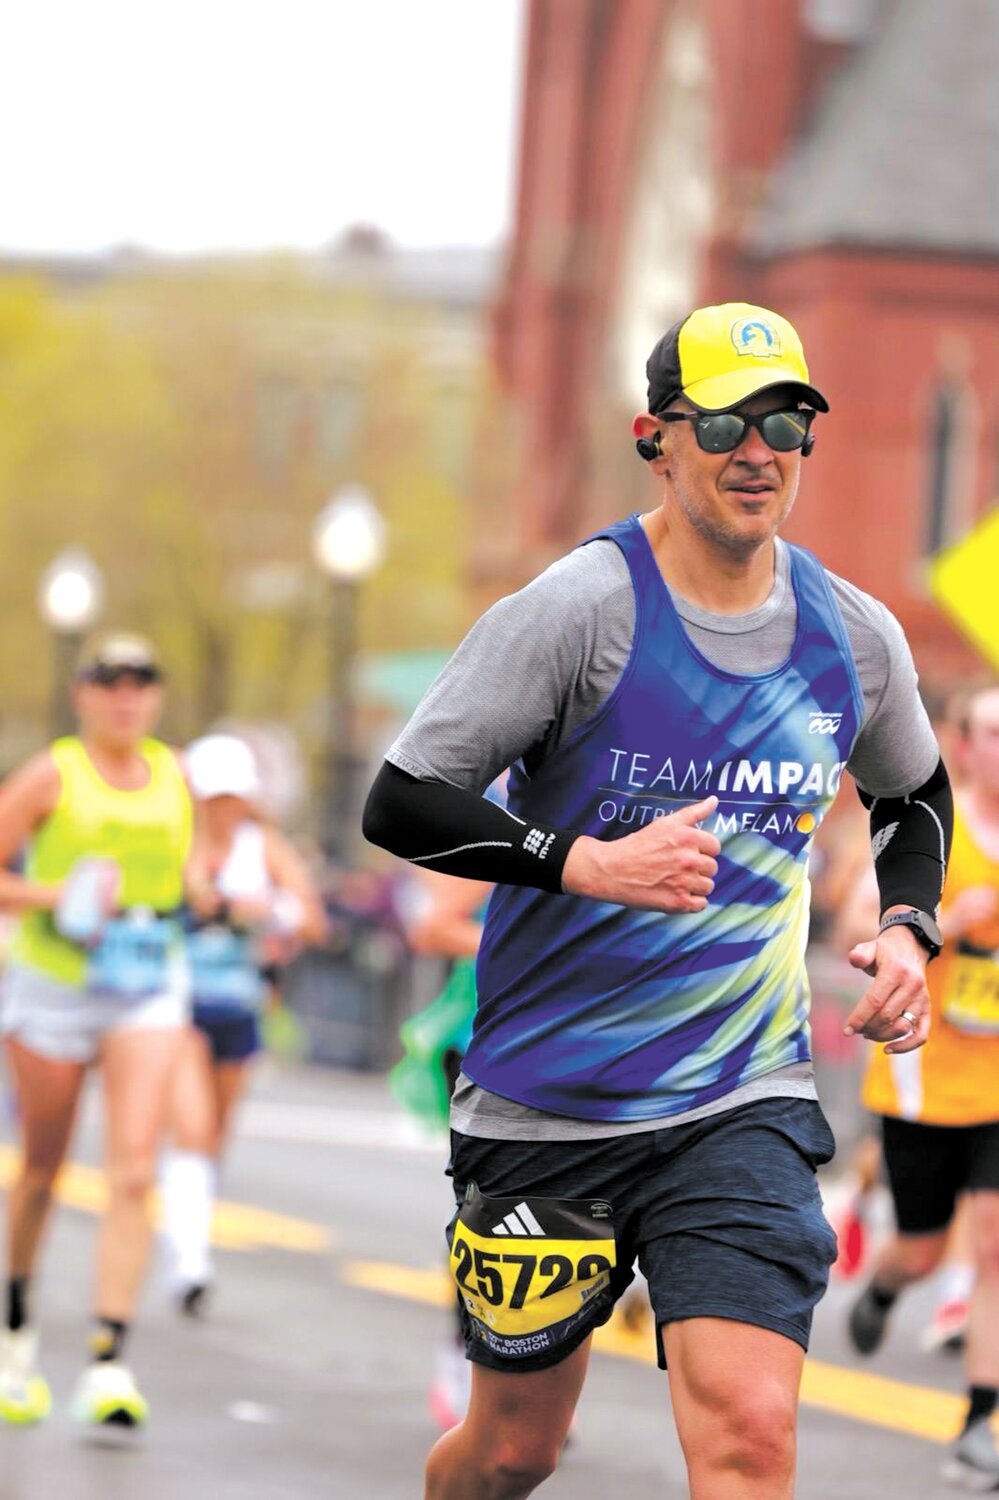 NEW TO THE CLUB: Local runner Daniel Anter competes in the Boston Marathon for the 25th time, joining the Quarter Century Club, which is made of only 200 people. (Submitted photo)